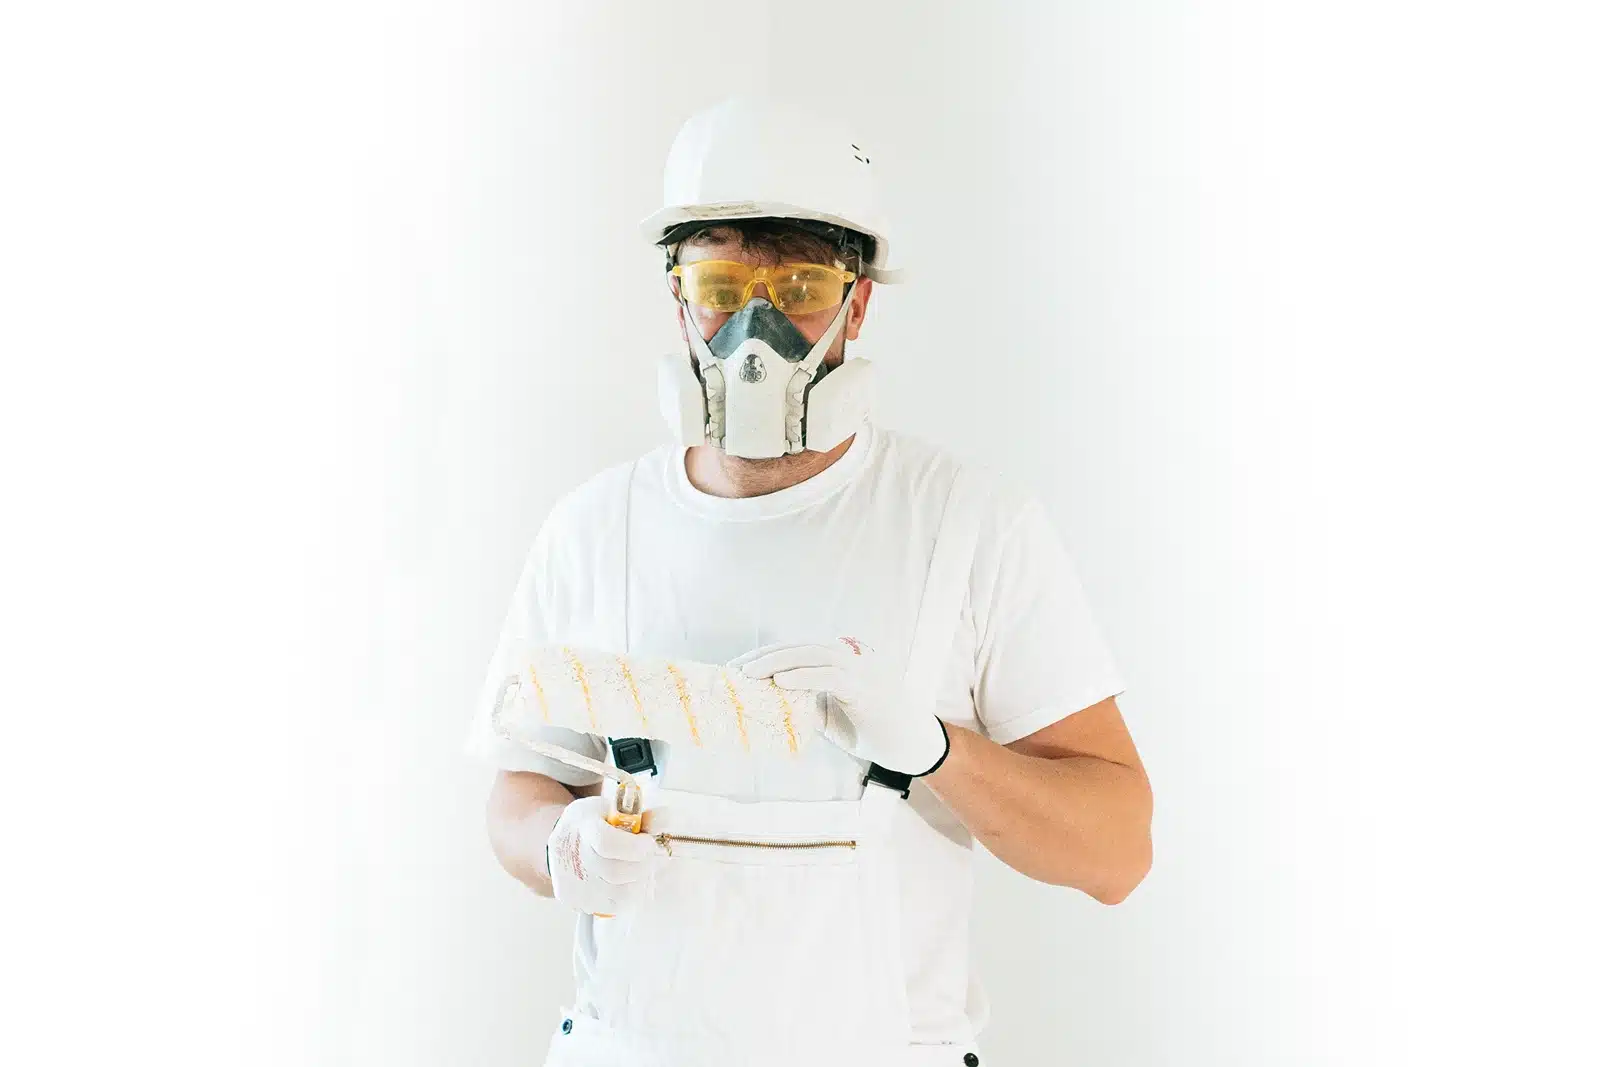 International Union of Painters and Allied Trades (IUPAT), image of painter in all white with mask on 